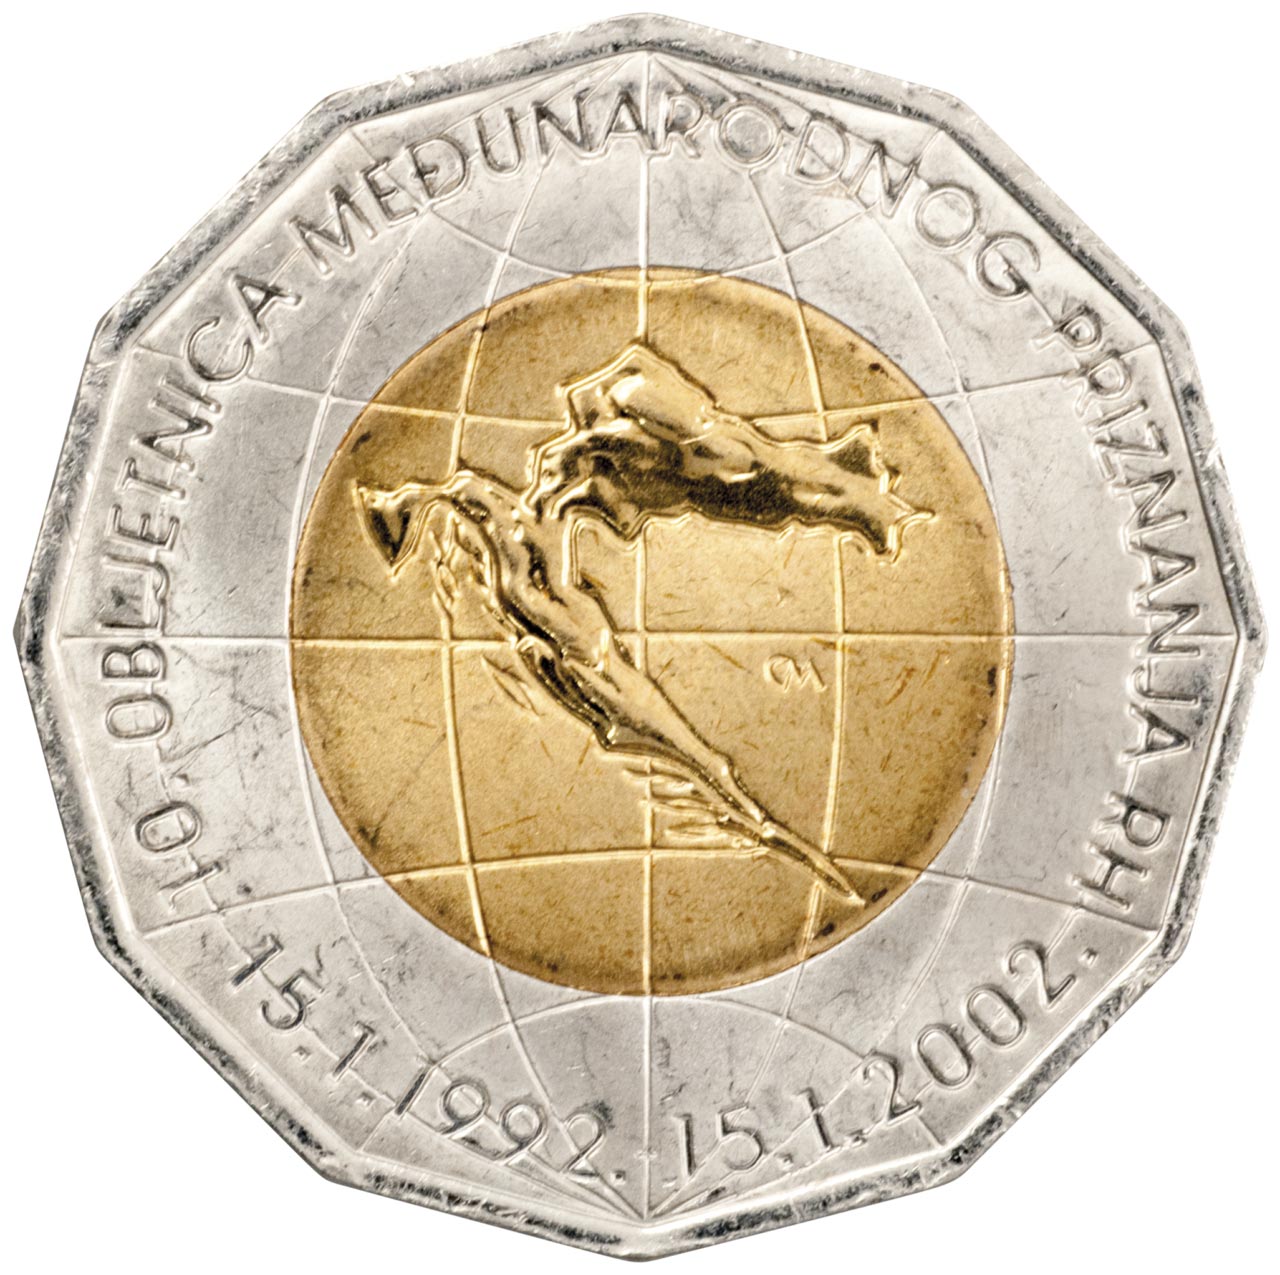 Image of 25 kuna coin - 10th Anniversary of the International Recognition of the Republic of Croatia | Croatia 2002.  The Copper–Nickel (CuNi) coin is of BU quality.